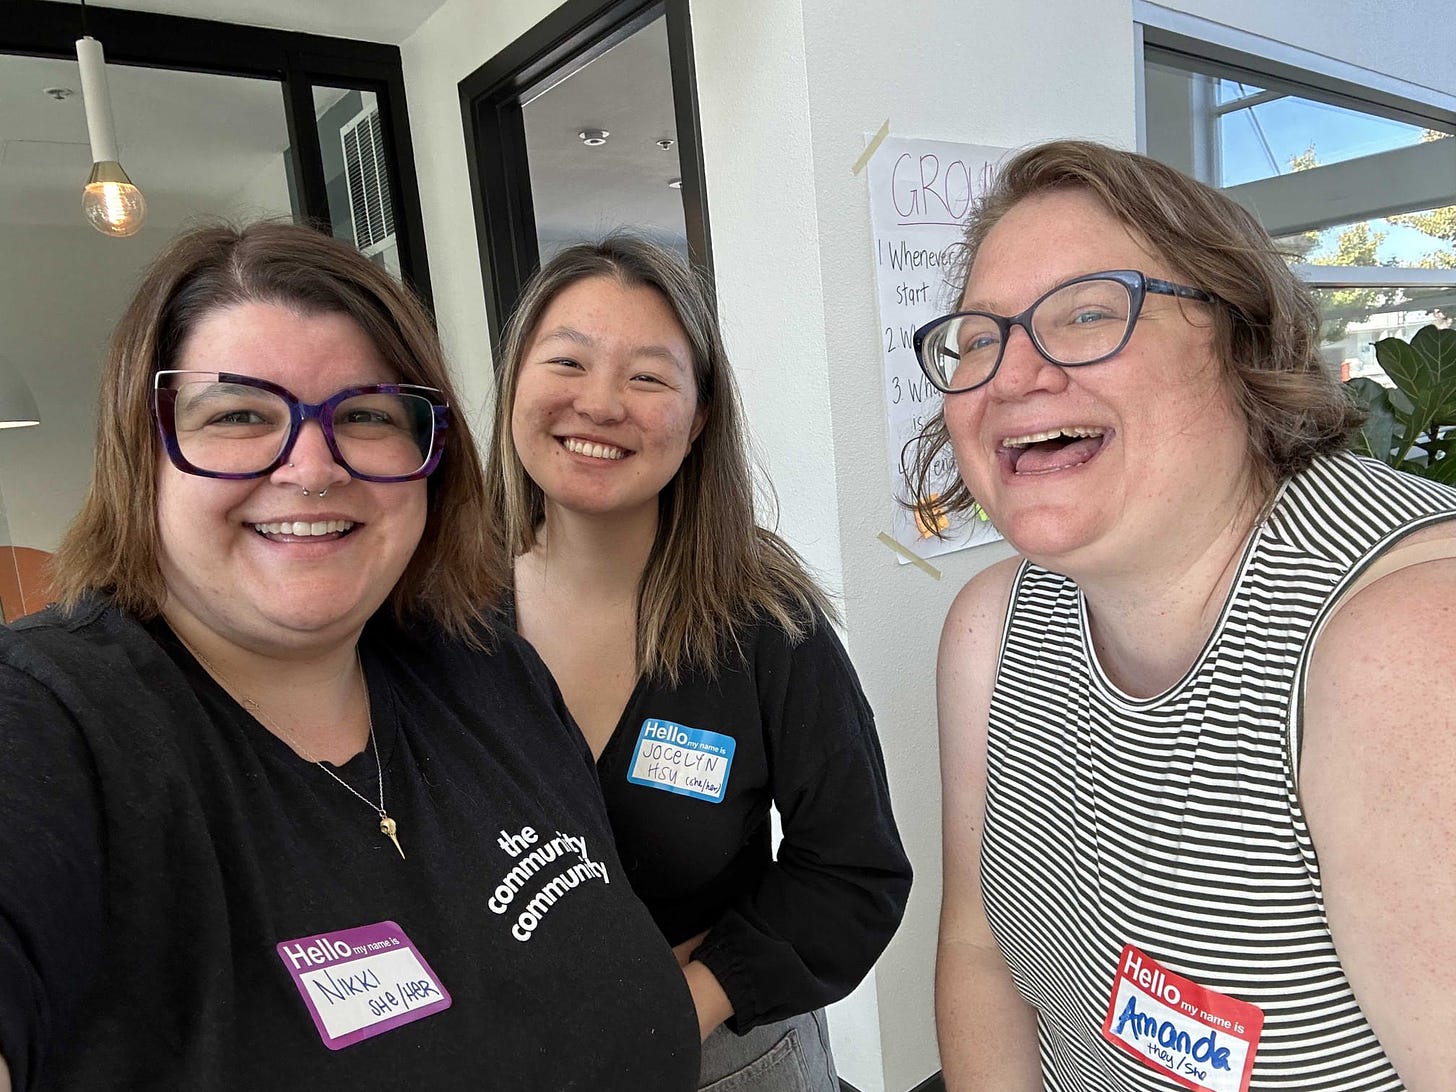 A picture showing the authors, Nikki, Jocelyn, and Amanda smiling and laughing